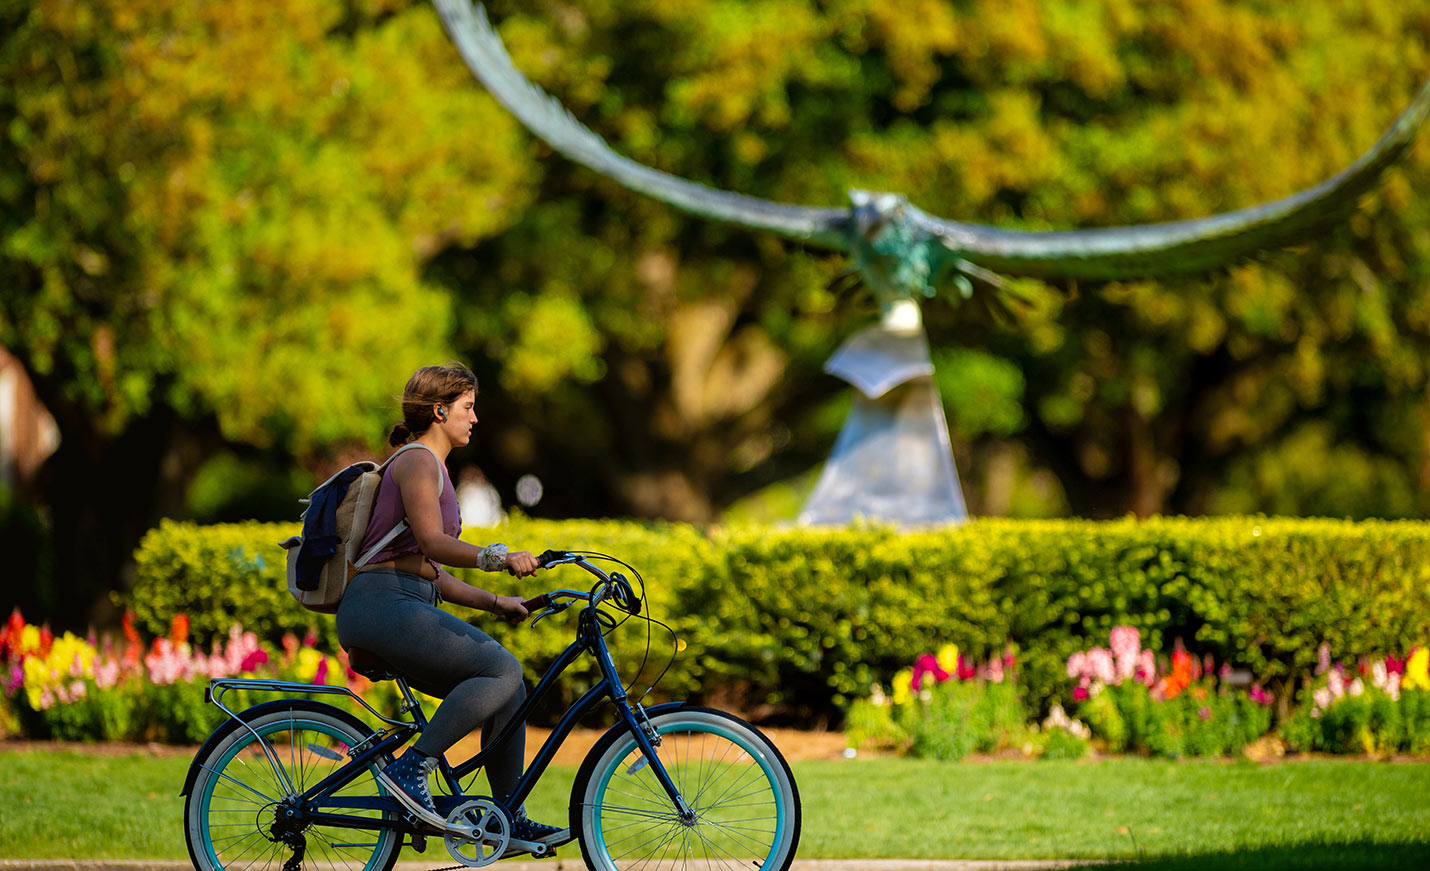 A student rides a bike past the soaring Seahawk sculpture. The background also includes colorful flowers and shrubs.